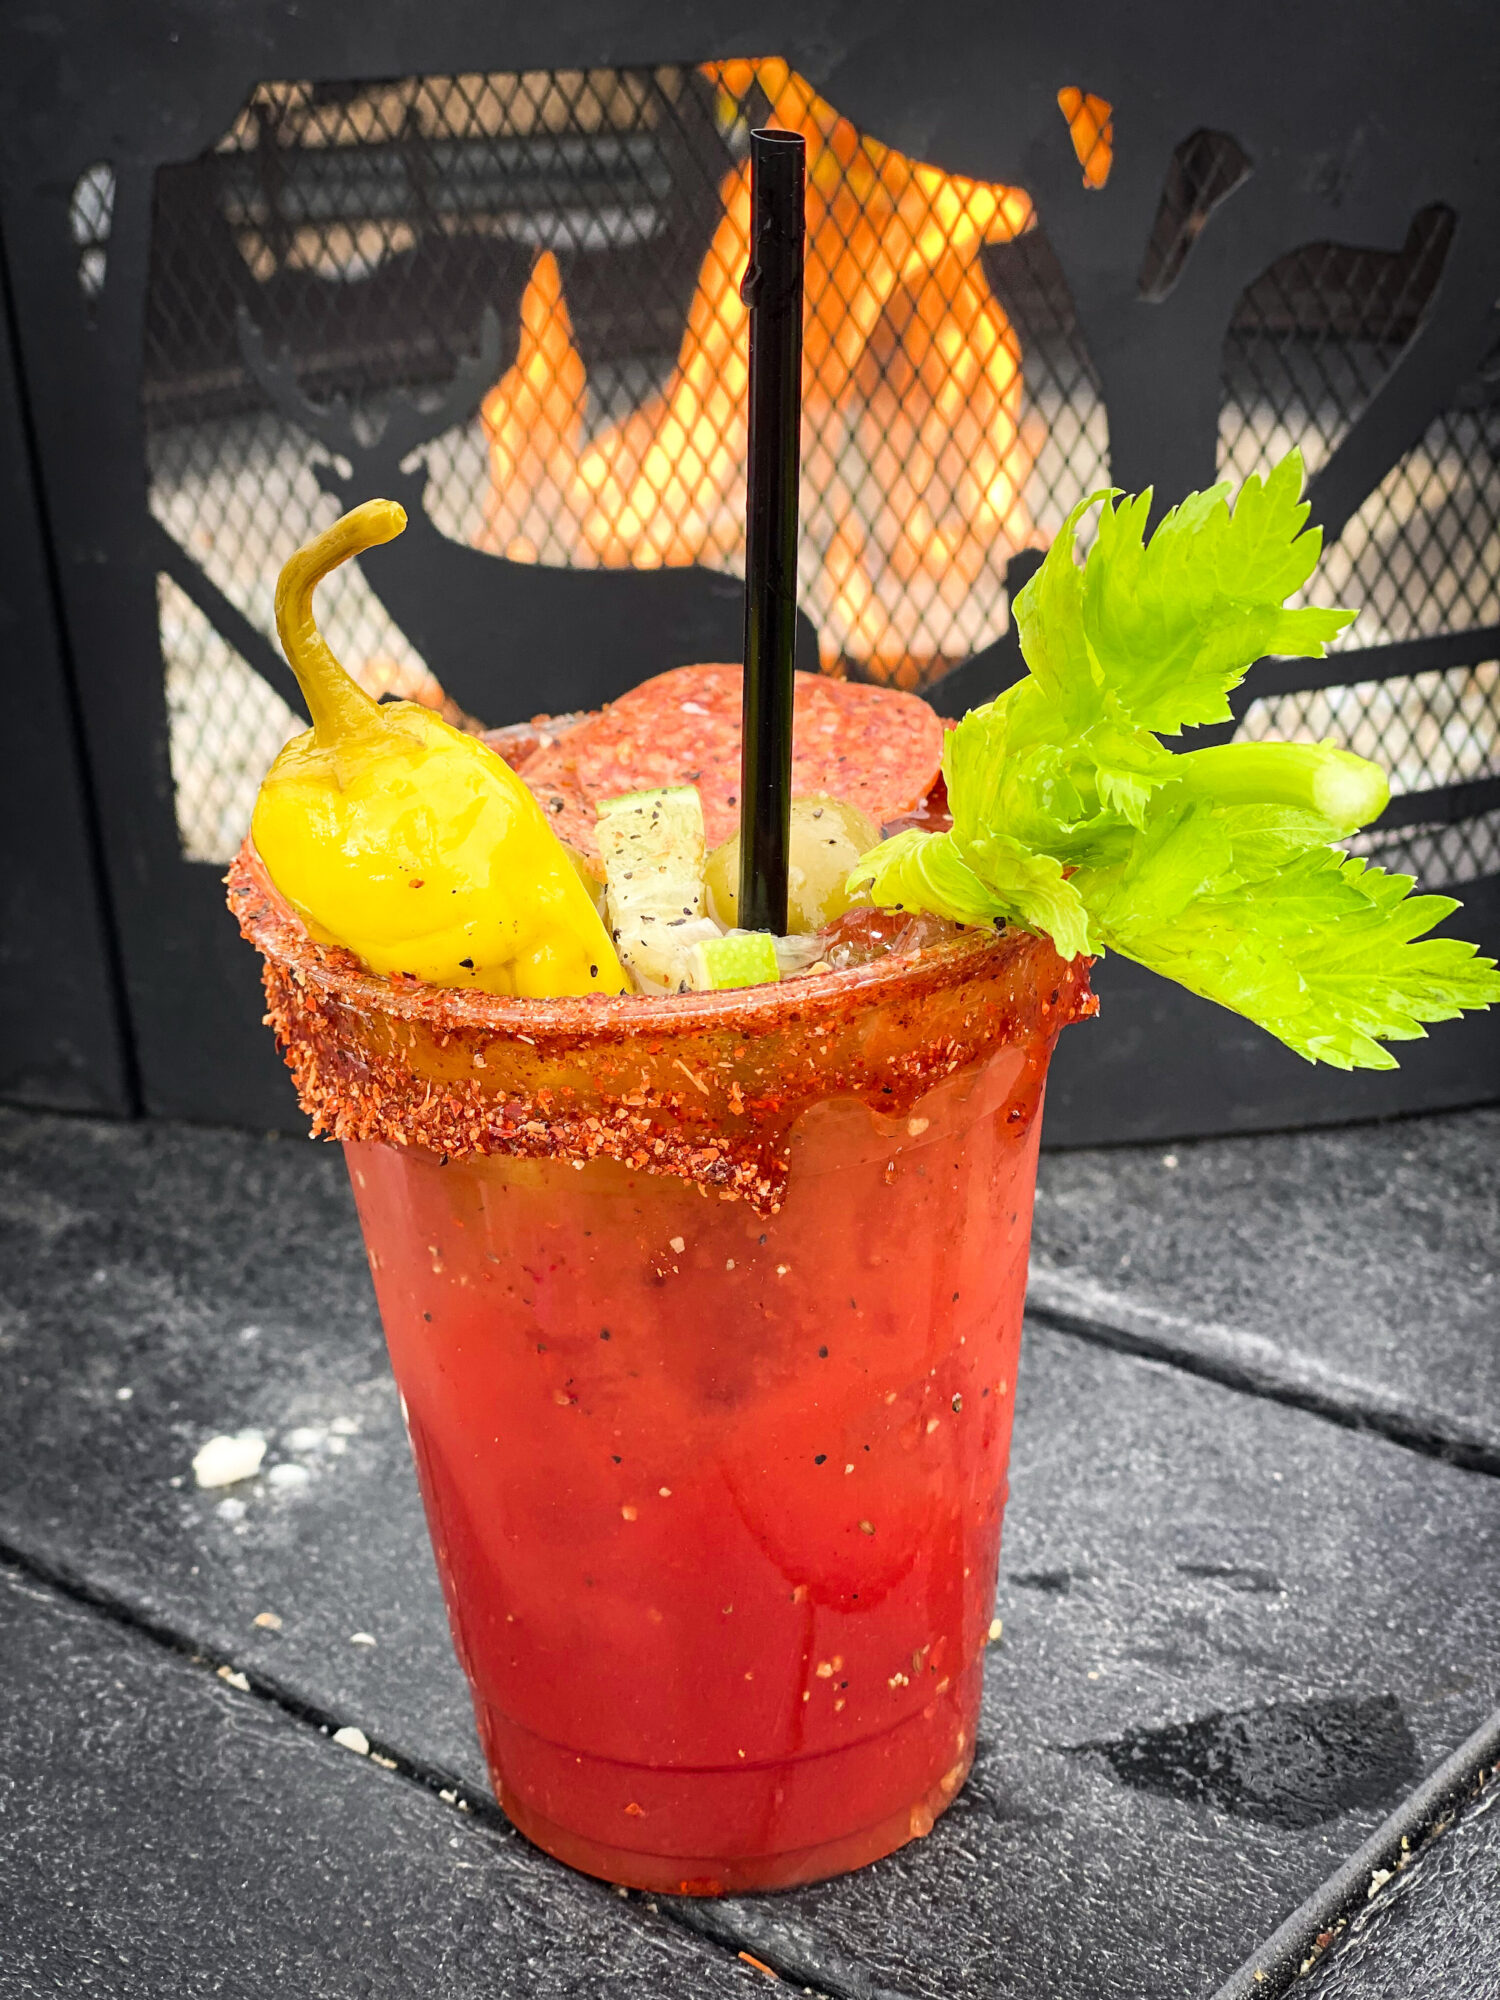 Bloody Mary drink with celery, pepperoni and pepperoncinis by the fire.